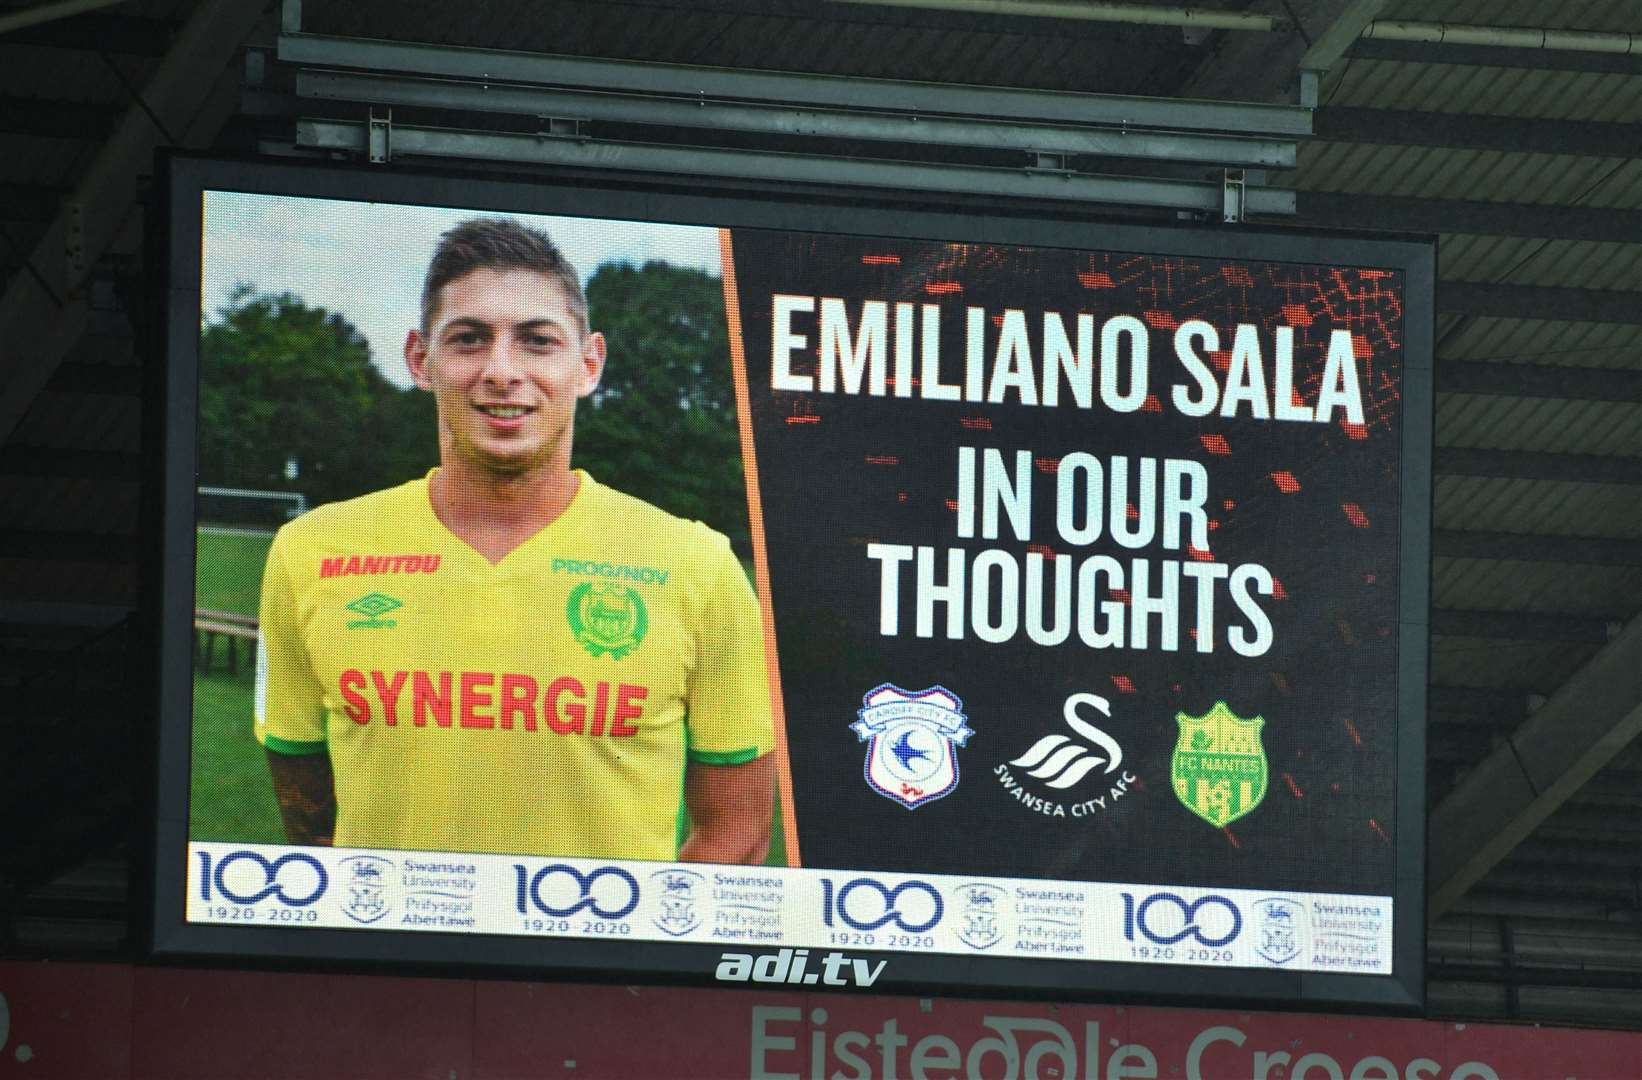 A tribute to Cardiff City striker Emiliano Sala is shown on the big screen at the Liberty Stadium, Swansea (PA)